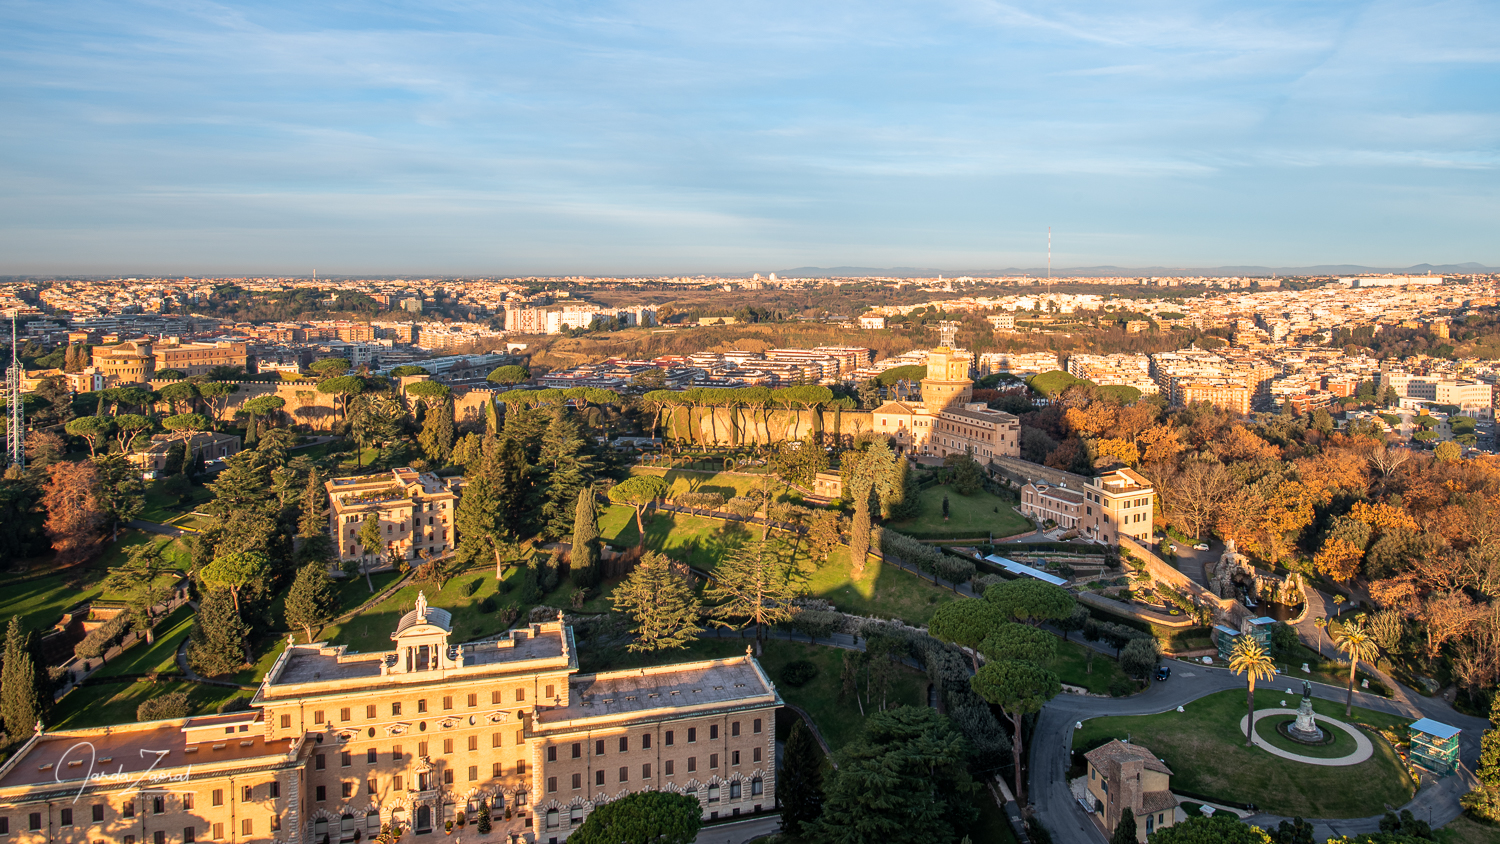 View over Vatican gardens from the Dome of st. Peter's Basilica 